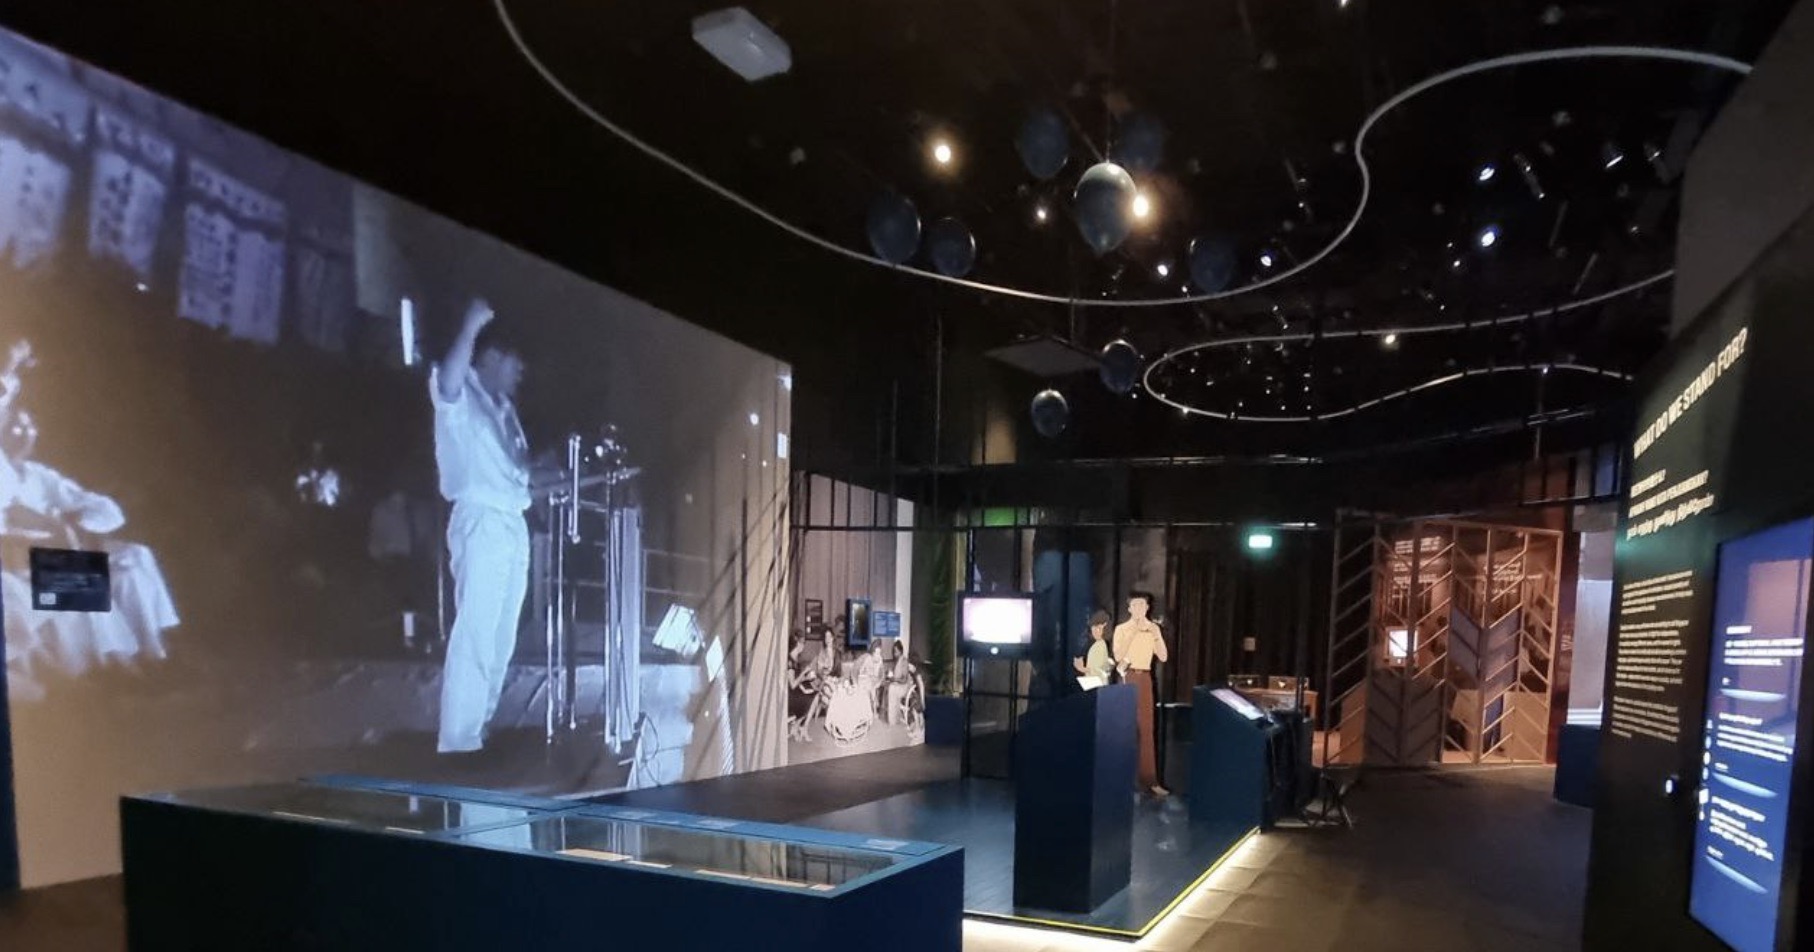 Founders' Memorial pilots new exhibition at National Museum, details  nation-building from 1950s-1970s -  - News from Singapore,  Asia and around the world